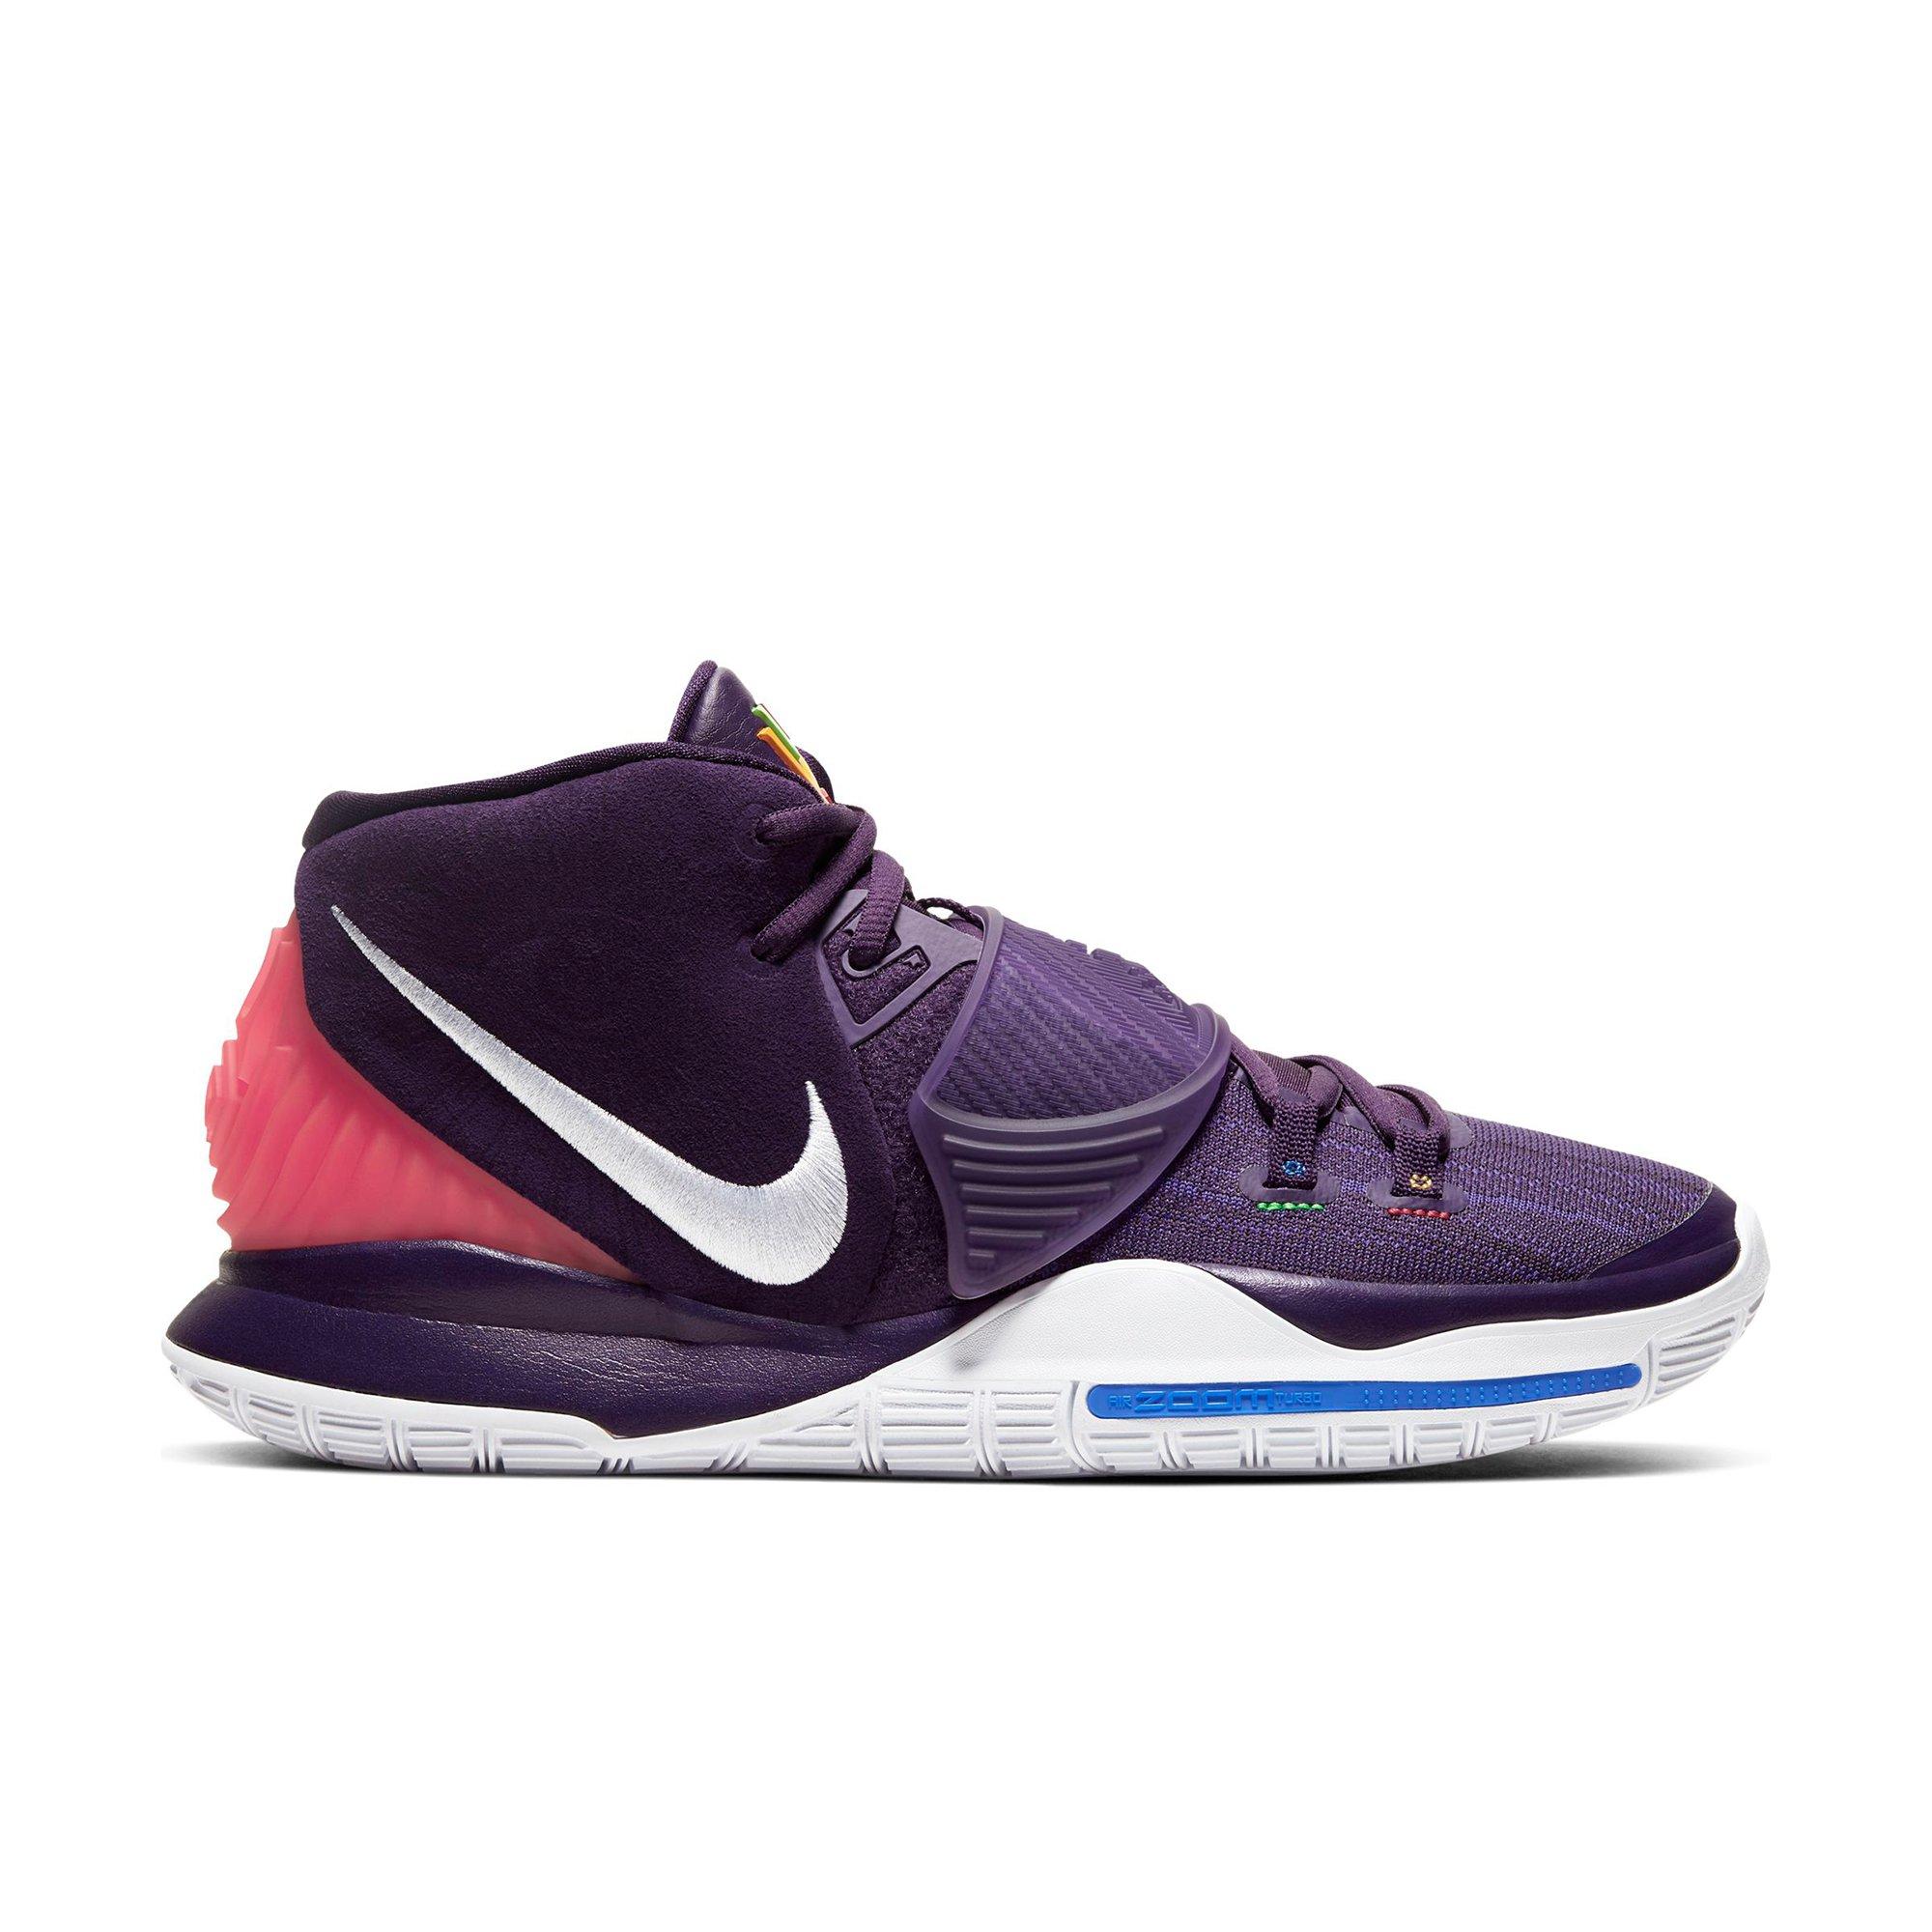 kyrie 5 purple and white